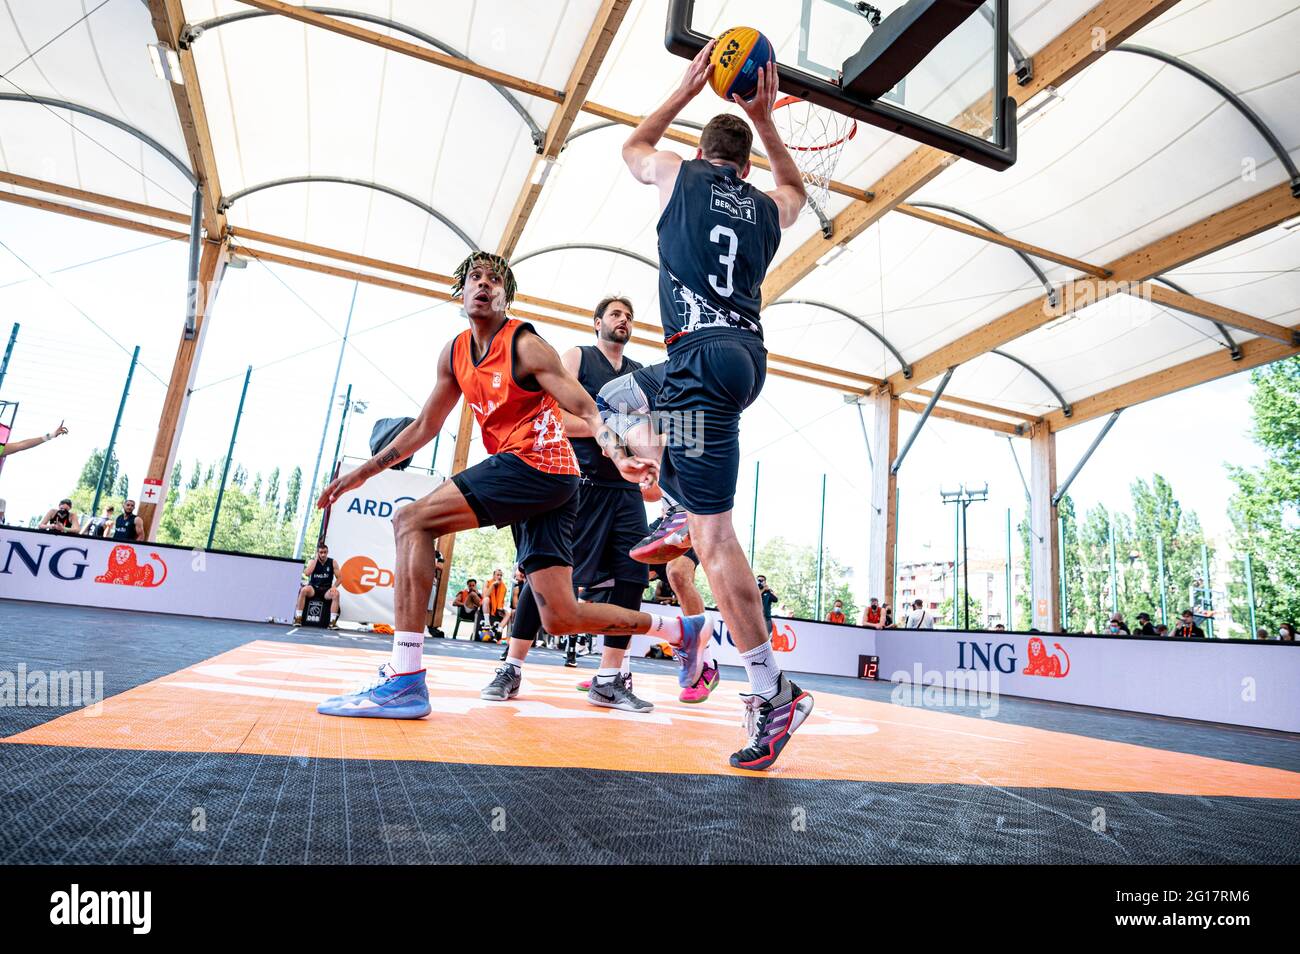 Berlin, Germany. 05th June, 2021. Finals 2021 - 3x3 Basketball Men:  Phillipp Gruber (Bonn 2, r) shoots the ball in the qualification game  against Aachen. Credit: Fabian Sommer/dpa/Alamy Live News Stock Photo -  Alamy